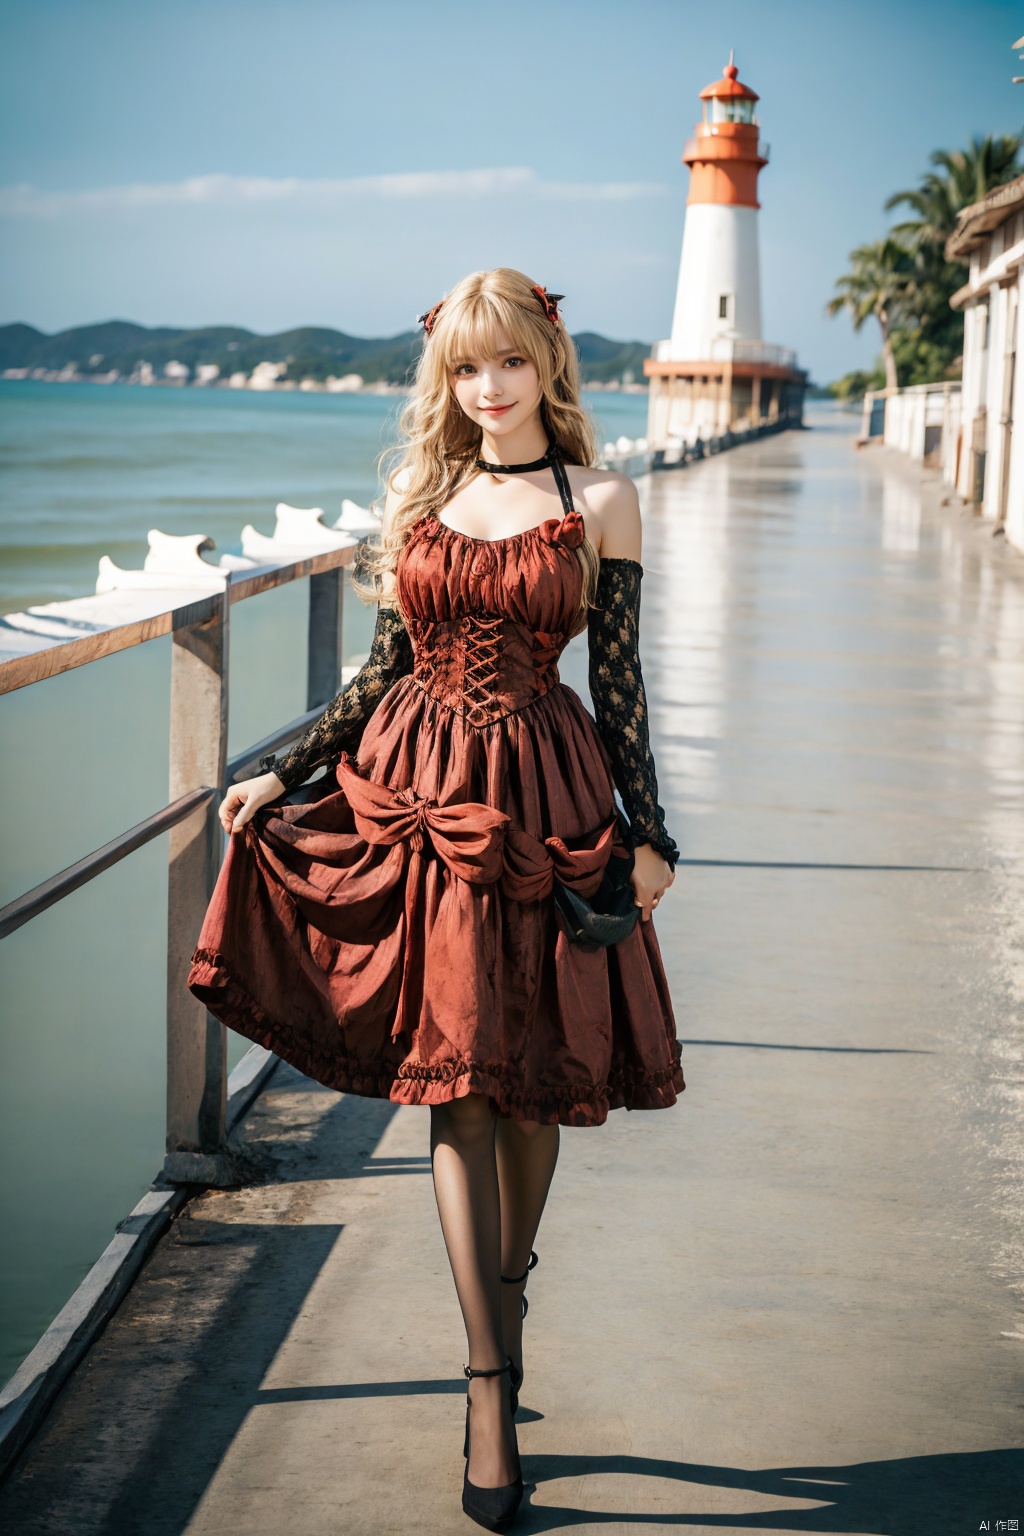 1 girl, (bright eyes, sun kissed skin, carefree expression), fashion, (colorful long skirt), playful posture, smile, full body, slender legs, young girl's body proportions, beach background, lighthouse, soft sea breeze, dynamic composition, golden hour lighting, blurred background, rich colors, fine details, surrealism, 50mm lens, relaxed atmosphere. Portrait photography, 35mm film, naturally blurry, ((poakl)), , dress, detached sleeves, thighhighs